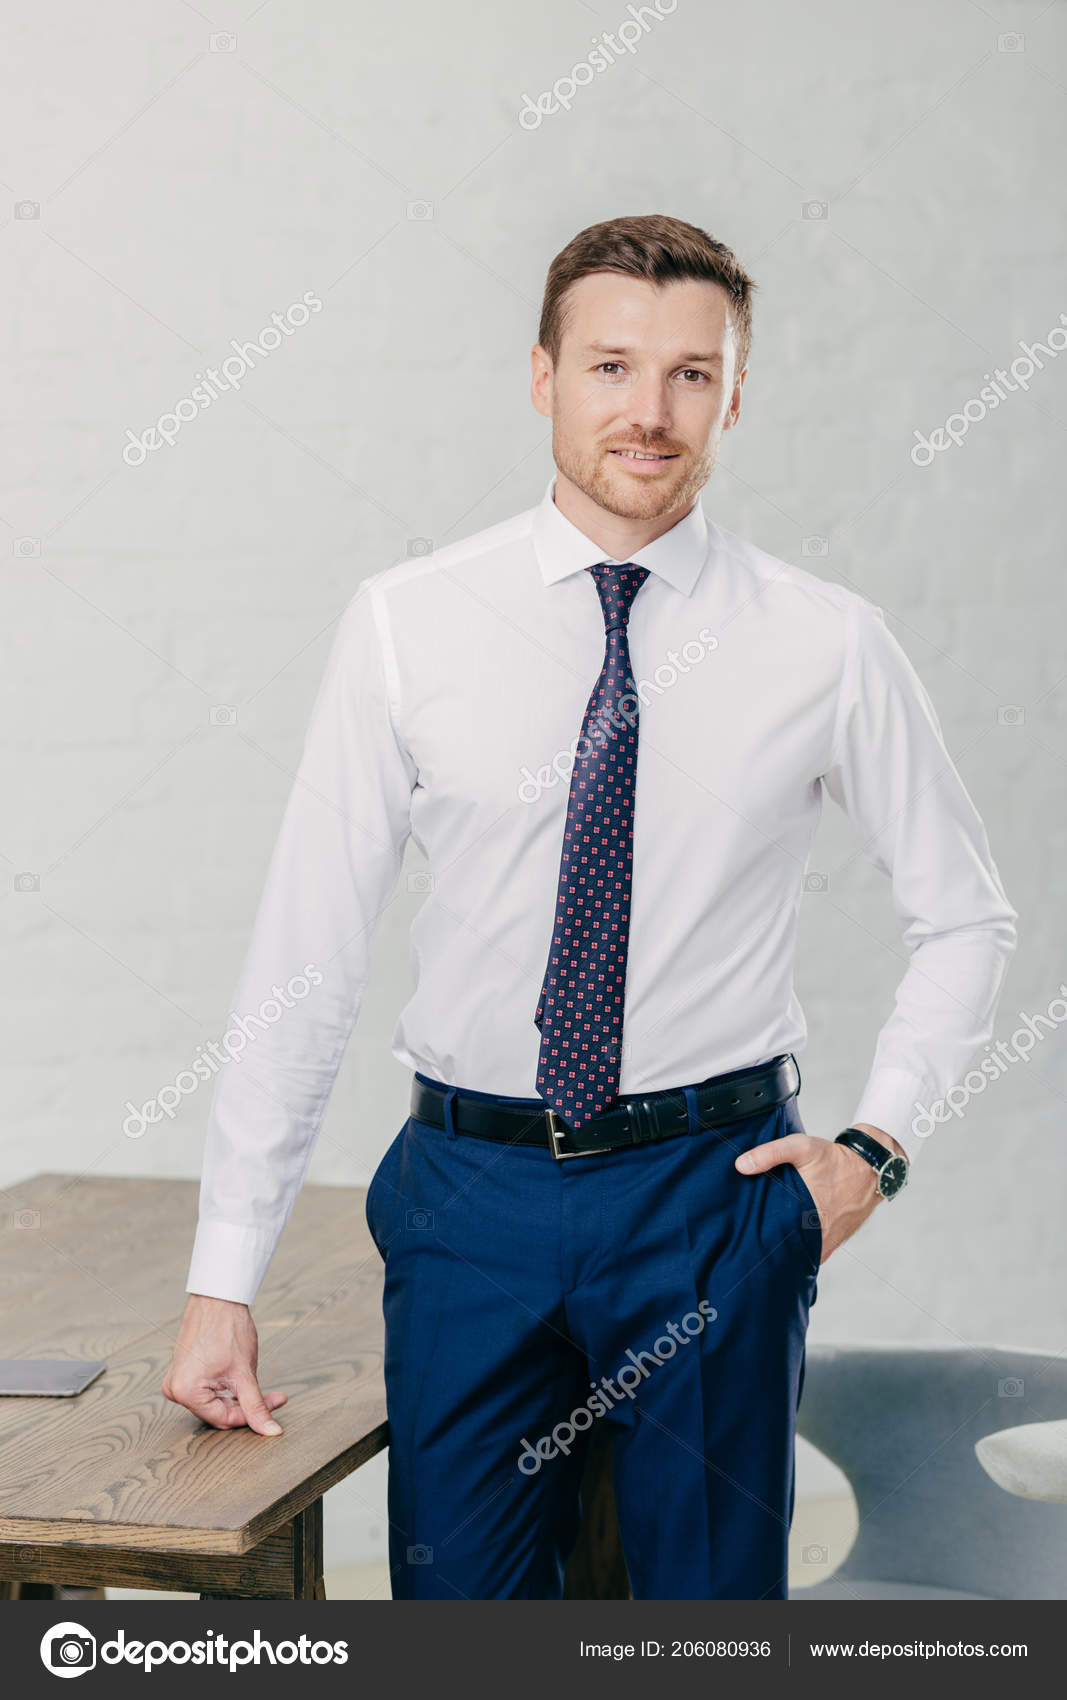 depositphotos 206080936 stock photo attractive prosperous male formal clothes